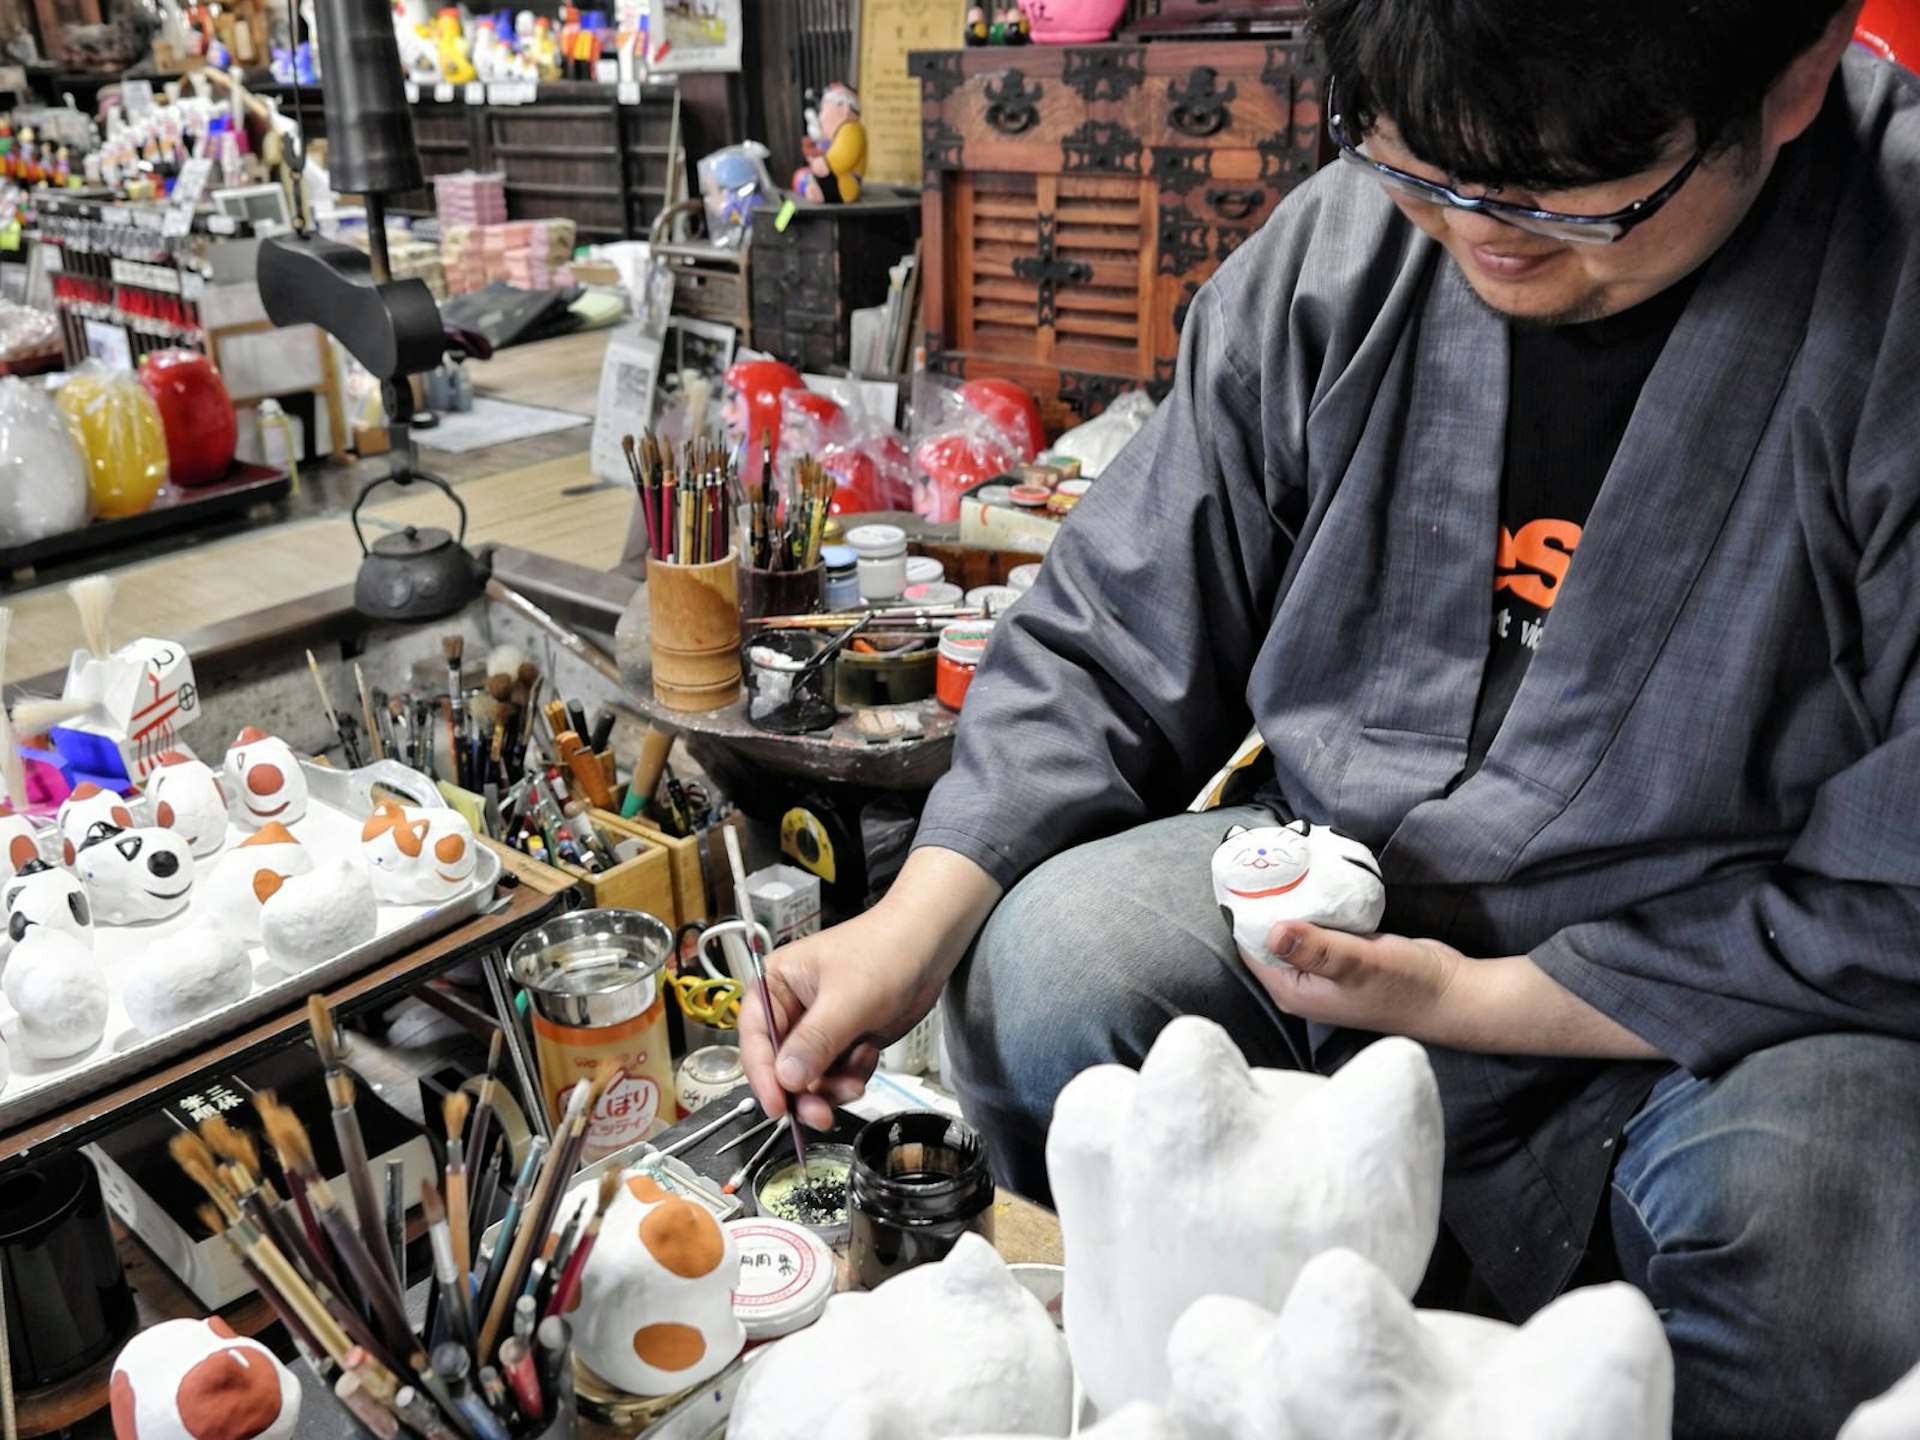 Artisan Daisuke Hashimoto sits in a studio surrounded by pains and various works in progress, painting a small papier mache cat © Manami Okazaki / Lonely Planet